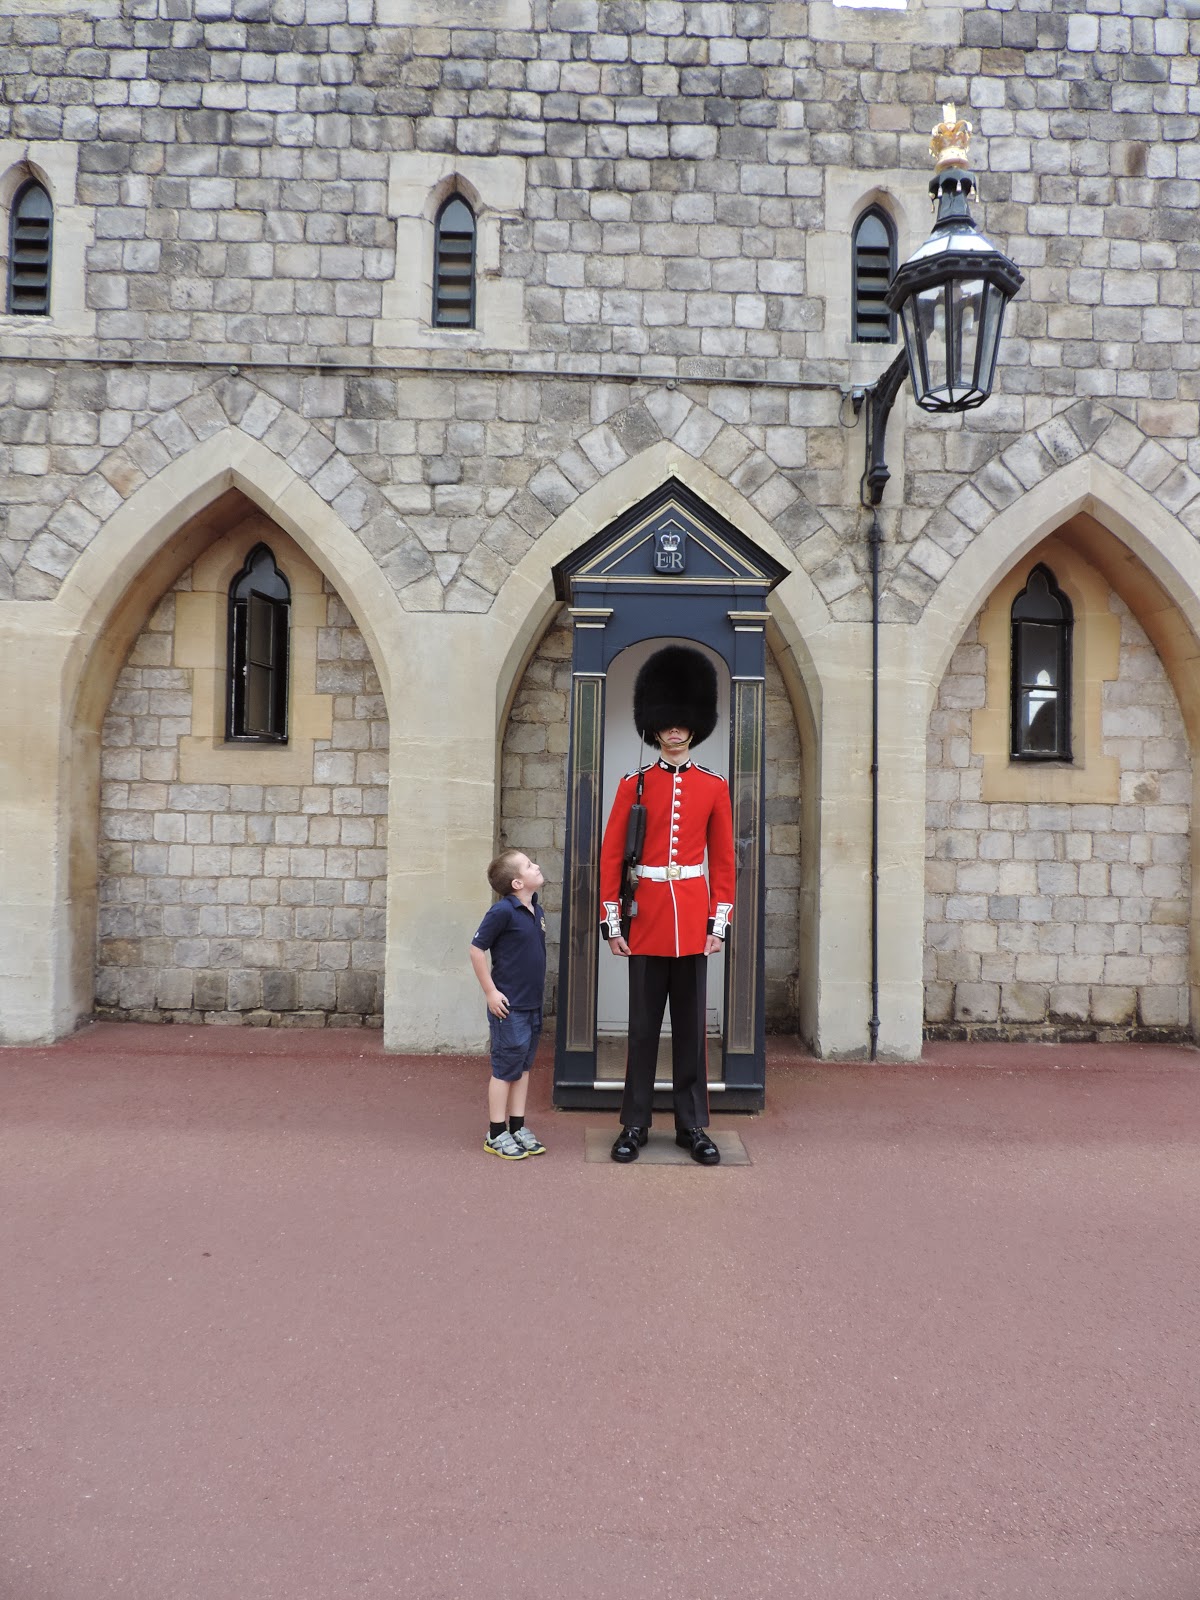 fully armed beefeater soldier royal entourage guard